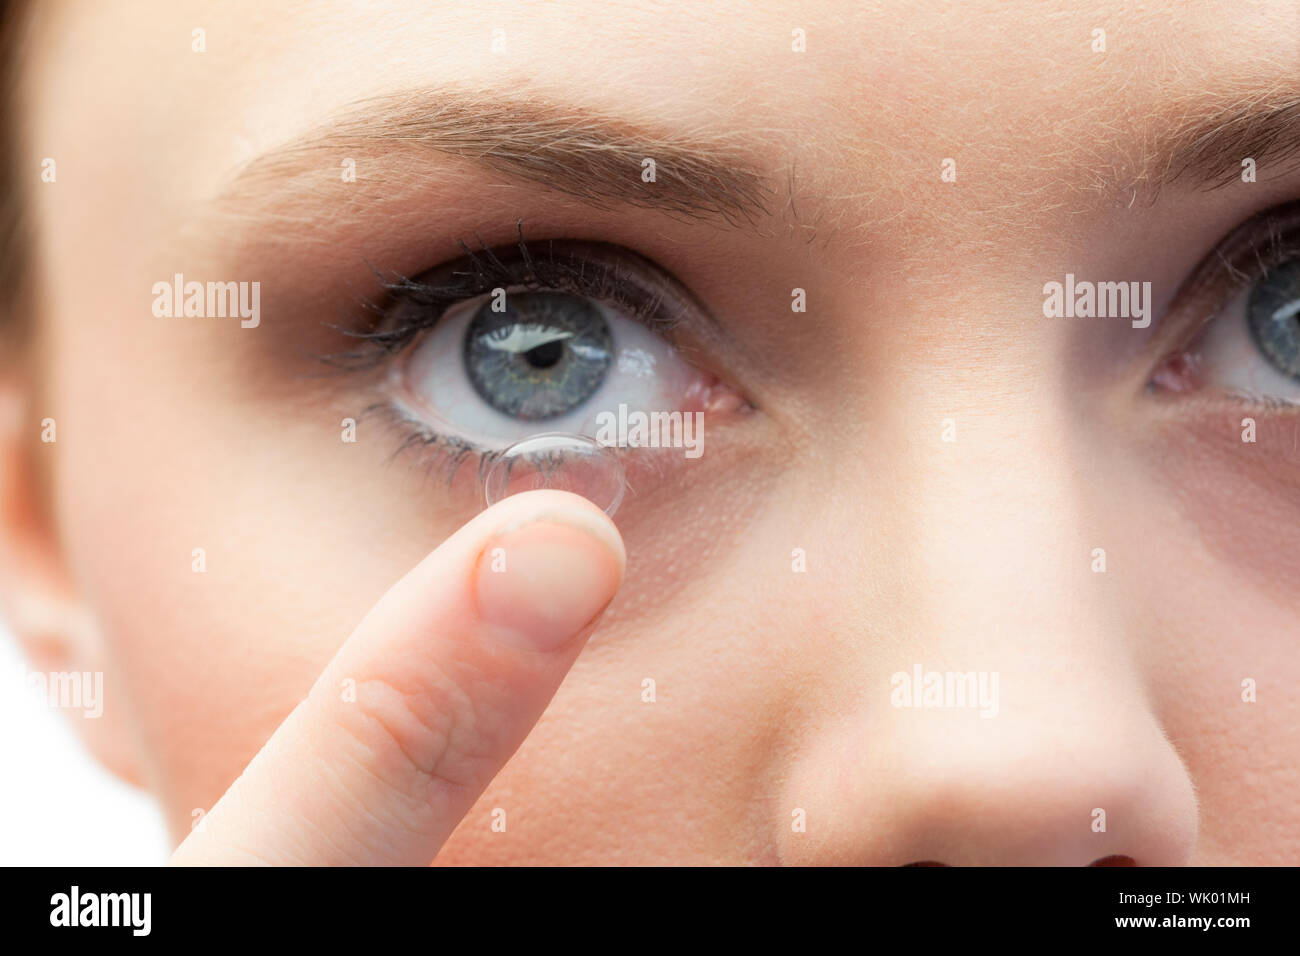 Extreme close up on gorgeous model applying contact lens Stock Photo